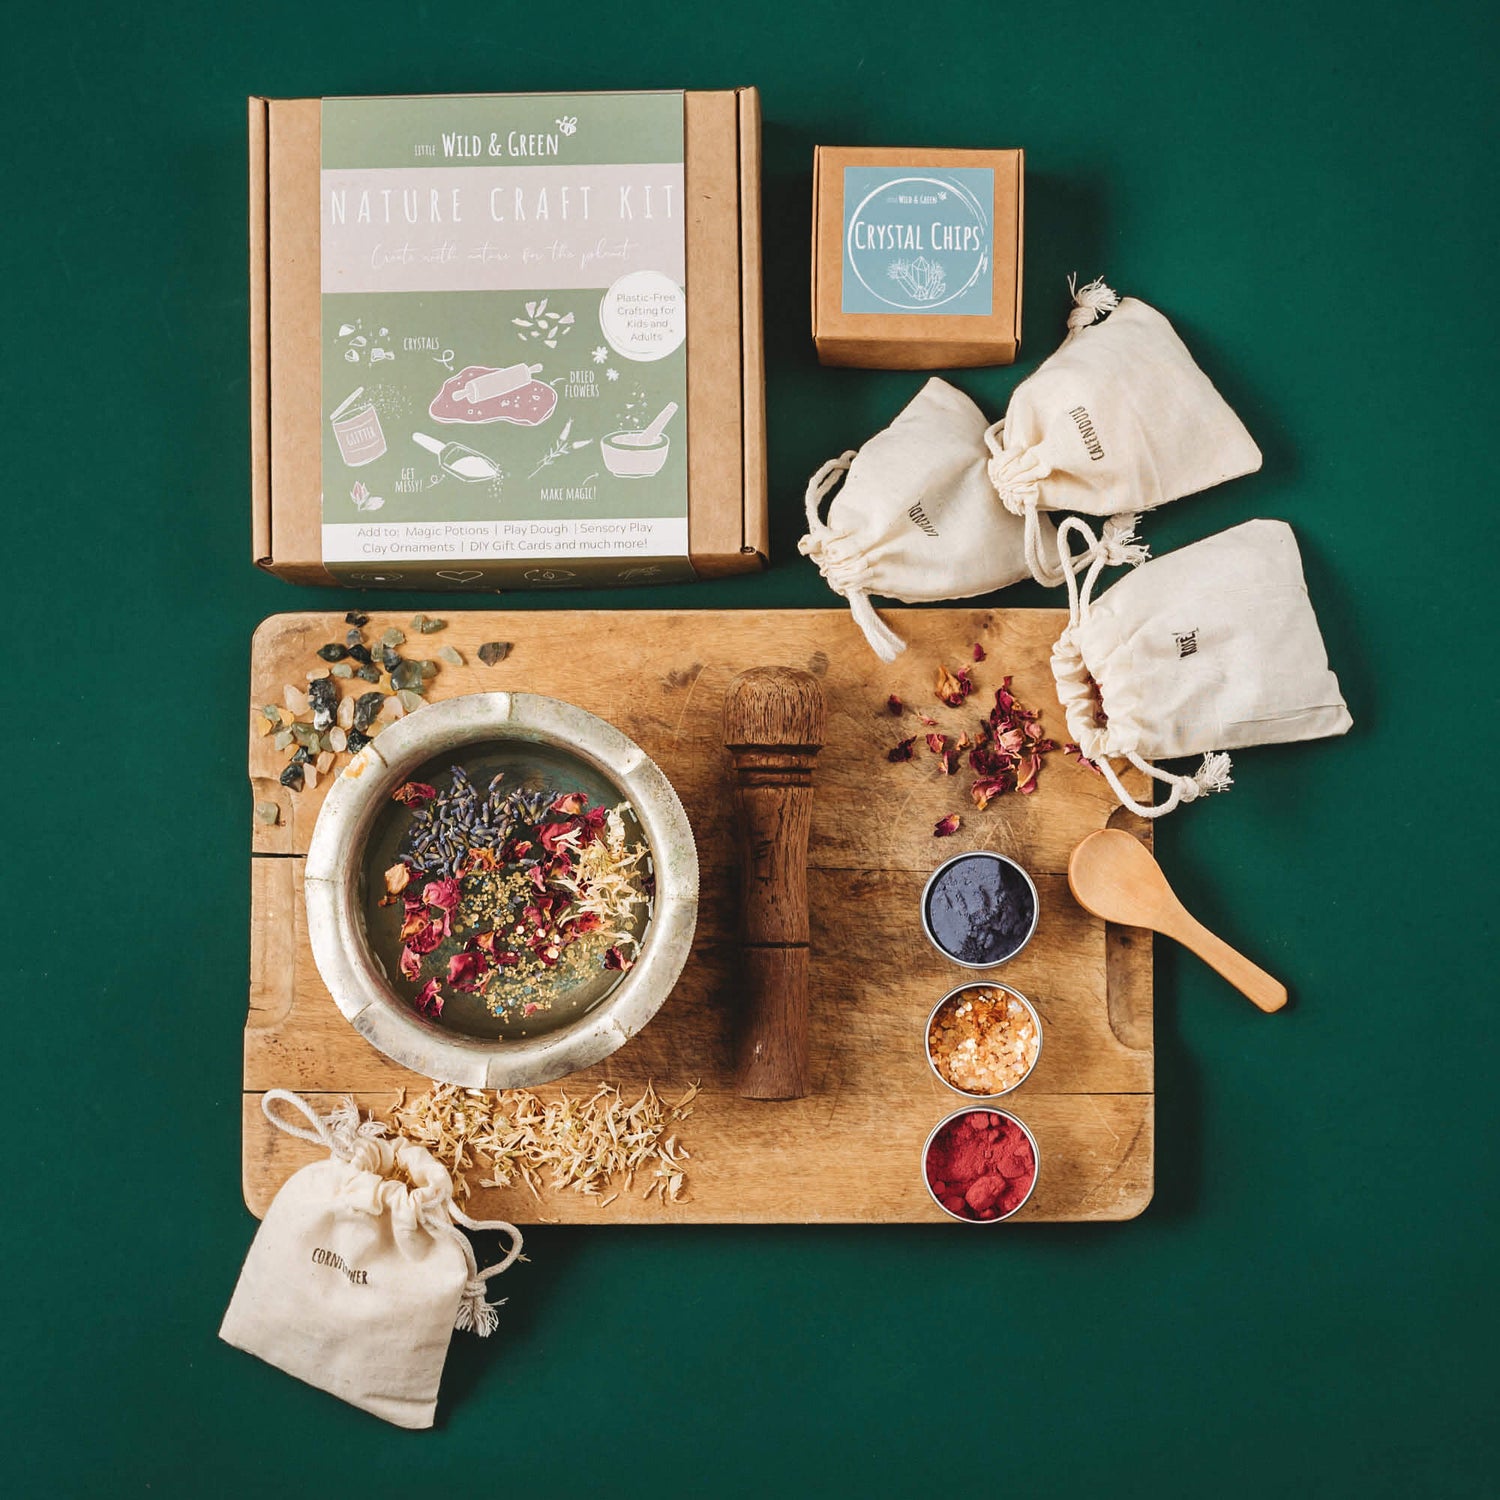 Nature craft kit by Little Wild and Green made with all natural materials including 4 bags of petals, 2 paint powders, 1 eco glitter, a box of crystal chips and a wooden spoon. perfect for nature crafting for kids including playdough, clay and magic potions from Your Wild Books